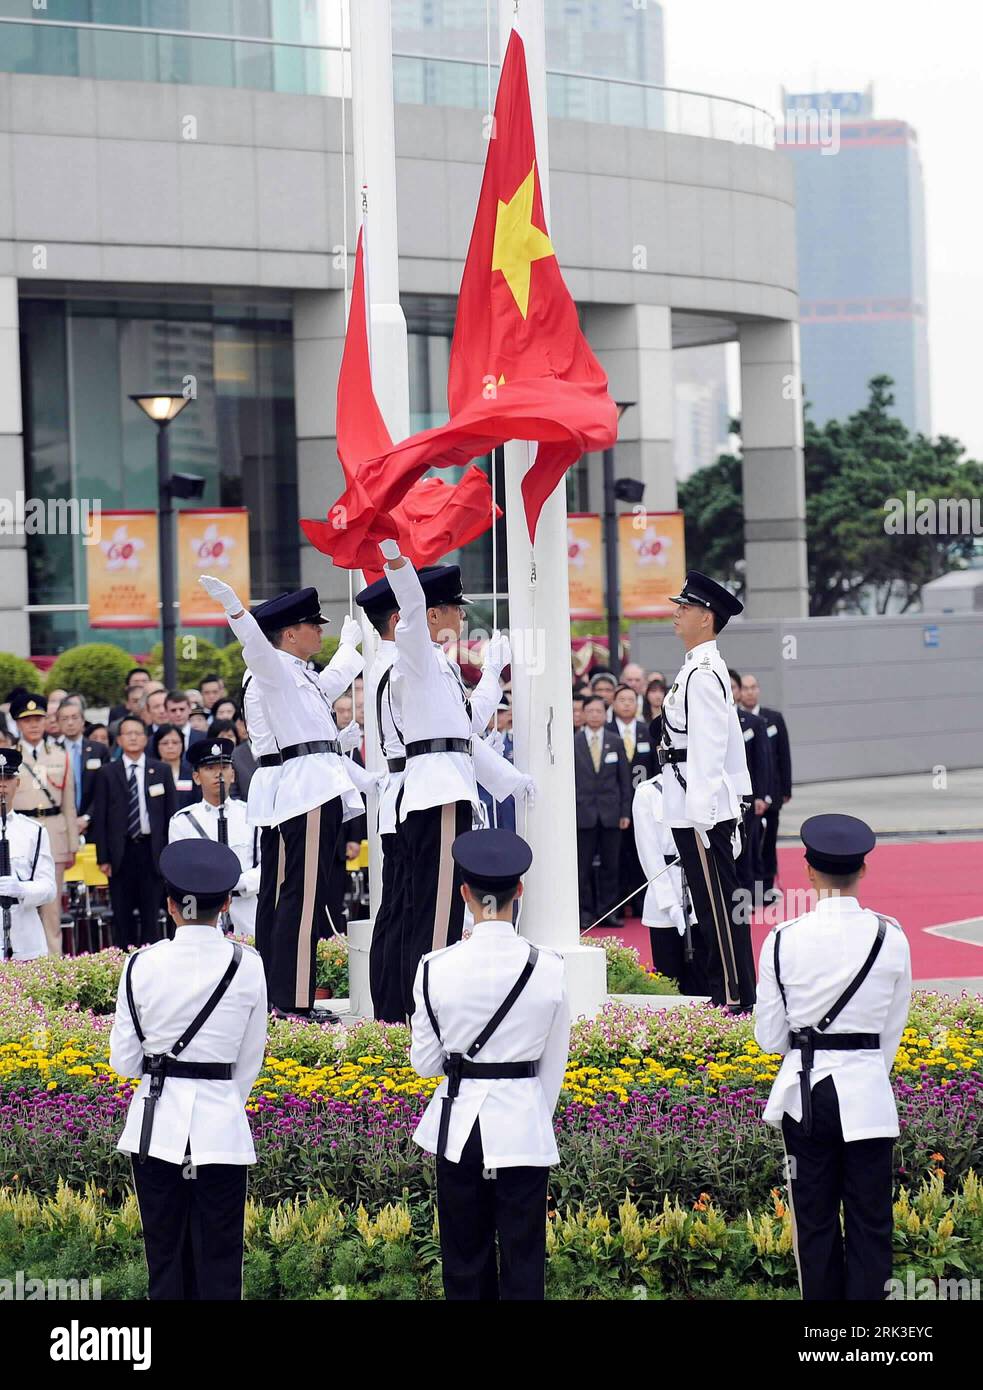 Bildnummer: 53478258  Datum: 01.10.2009  Copyright: imago/Xinhua (091001) -- HONG KONG, Oct. 1, 2009 (Xinhua) -- A flag-raising ceremony is held in south China s Hong Kong SAR, Oct. 1, 2009.all around China celebrate the 60th anniversary of the founding of the Republic of China on Thursday. (Xinhua/Chen Duo) (yc) CHINA-NATIONAL DAY-CELEBRATIONS-HONG KONG (CN) PUBLICATIONxNOTxINxCHN Nationalfeiertag 60 Jahre Volksrepublik China kbdig xsk 2009 hoch o0 Soldat, Militär, Fahne, Fahnenappell    Bildnummer 53478258 Date 01 10 2009 Copyright Imago XINHUA  Hong Kong OCT 1 2009 XINHUA a Flag Raising Cer Stock Photo